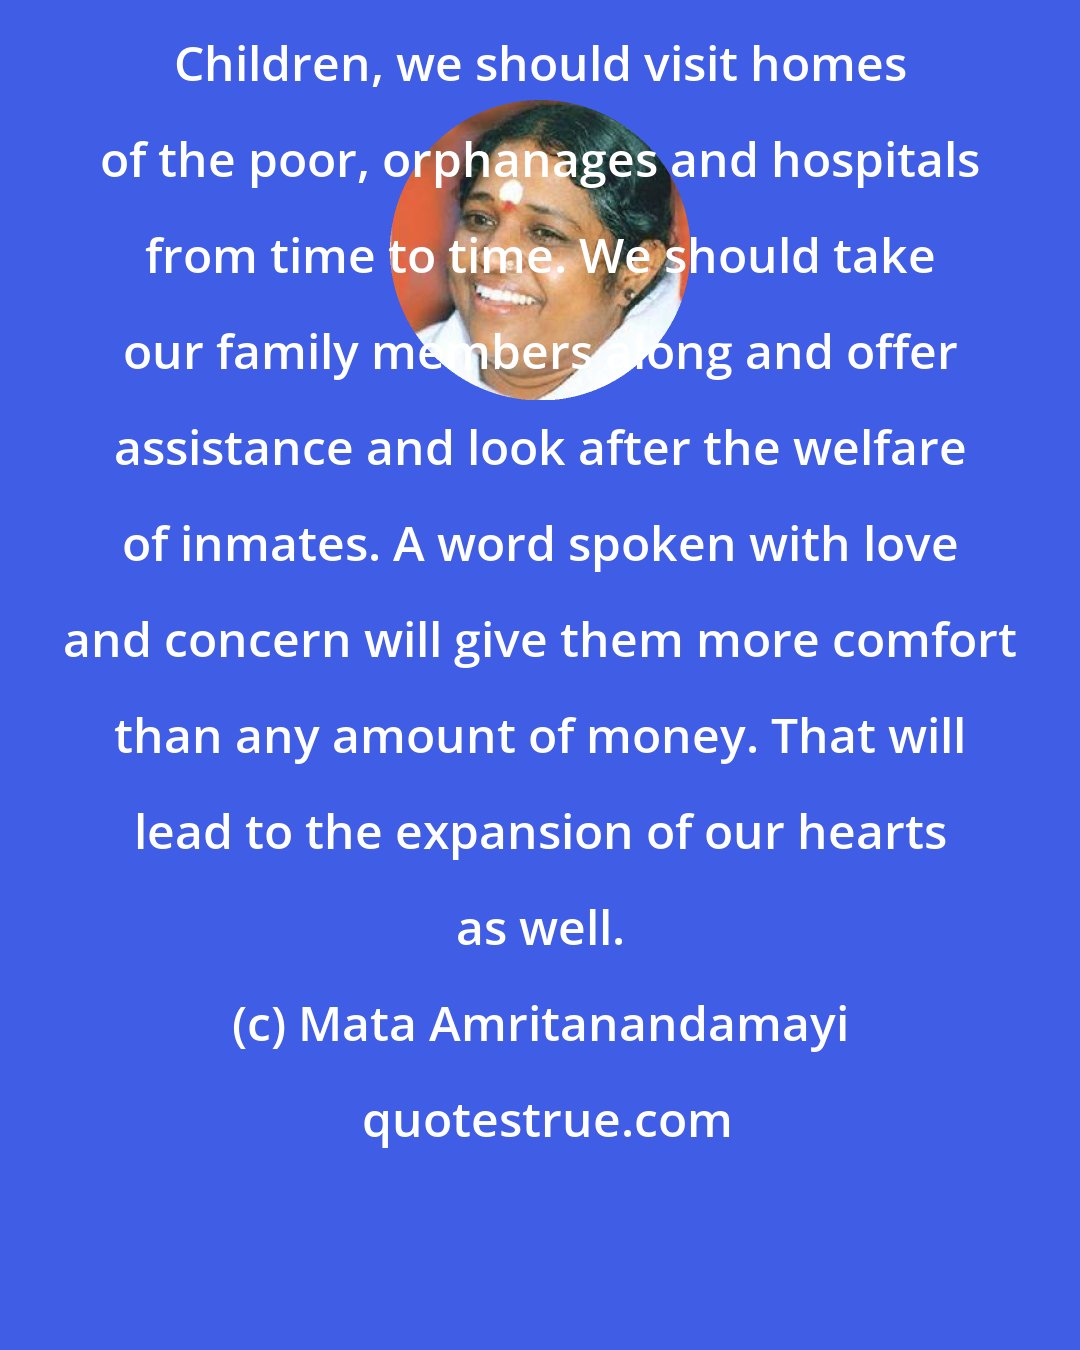 Mata Amritanandamayi: Children, we should visit homes of the poor, orphanages and hospitals from time to time. We should take our family members along and offer assistance and look after the welfare of inmates. A word spoken with love and concern will give them more comfort than any amount of money. That will lead to the expansion of our hearts as well.